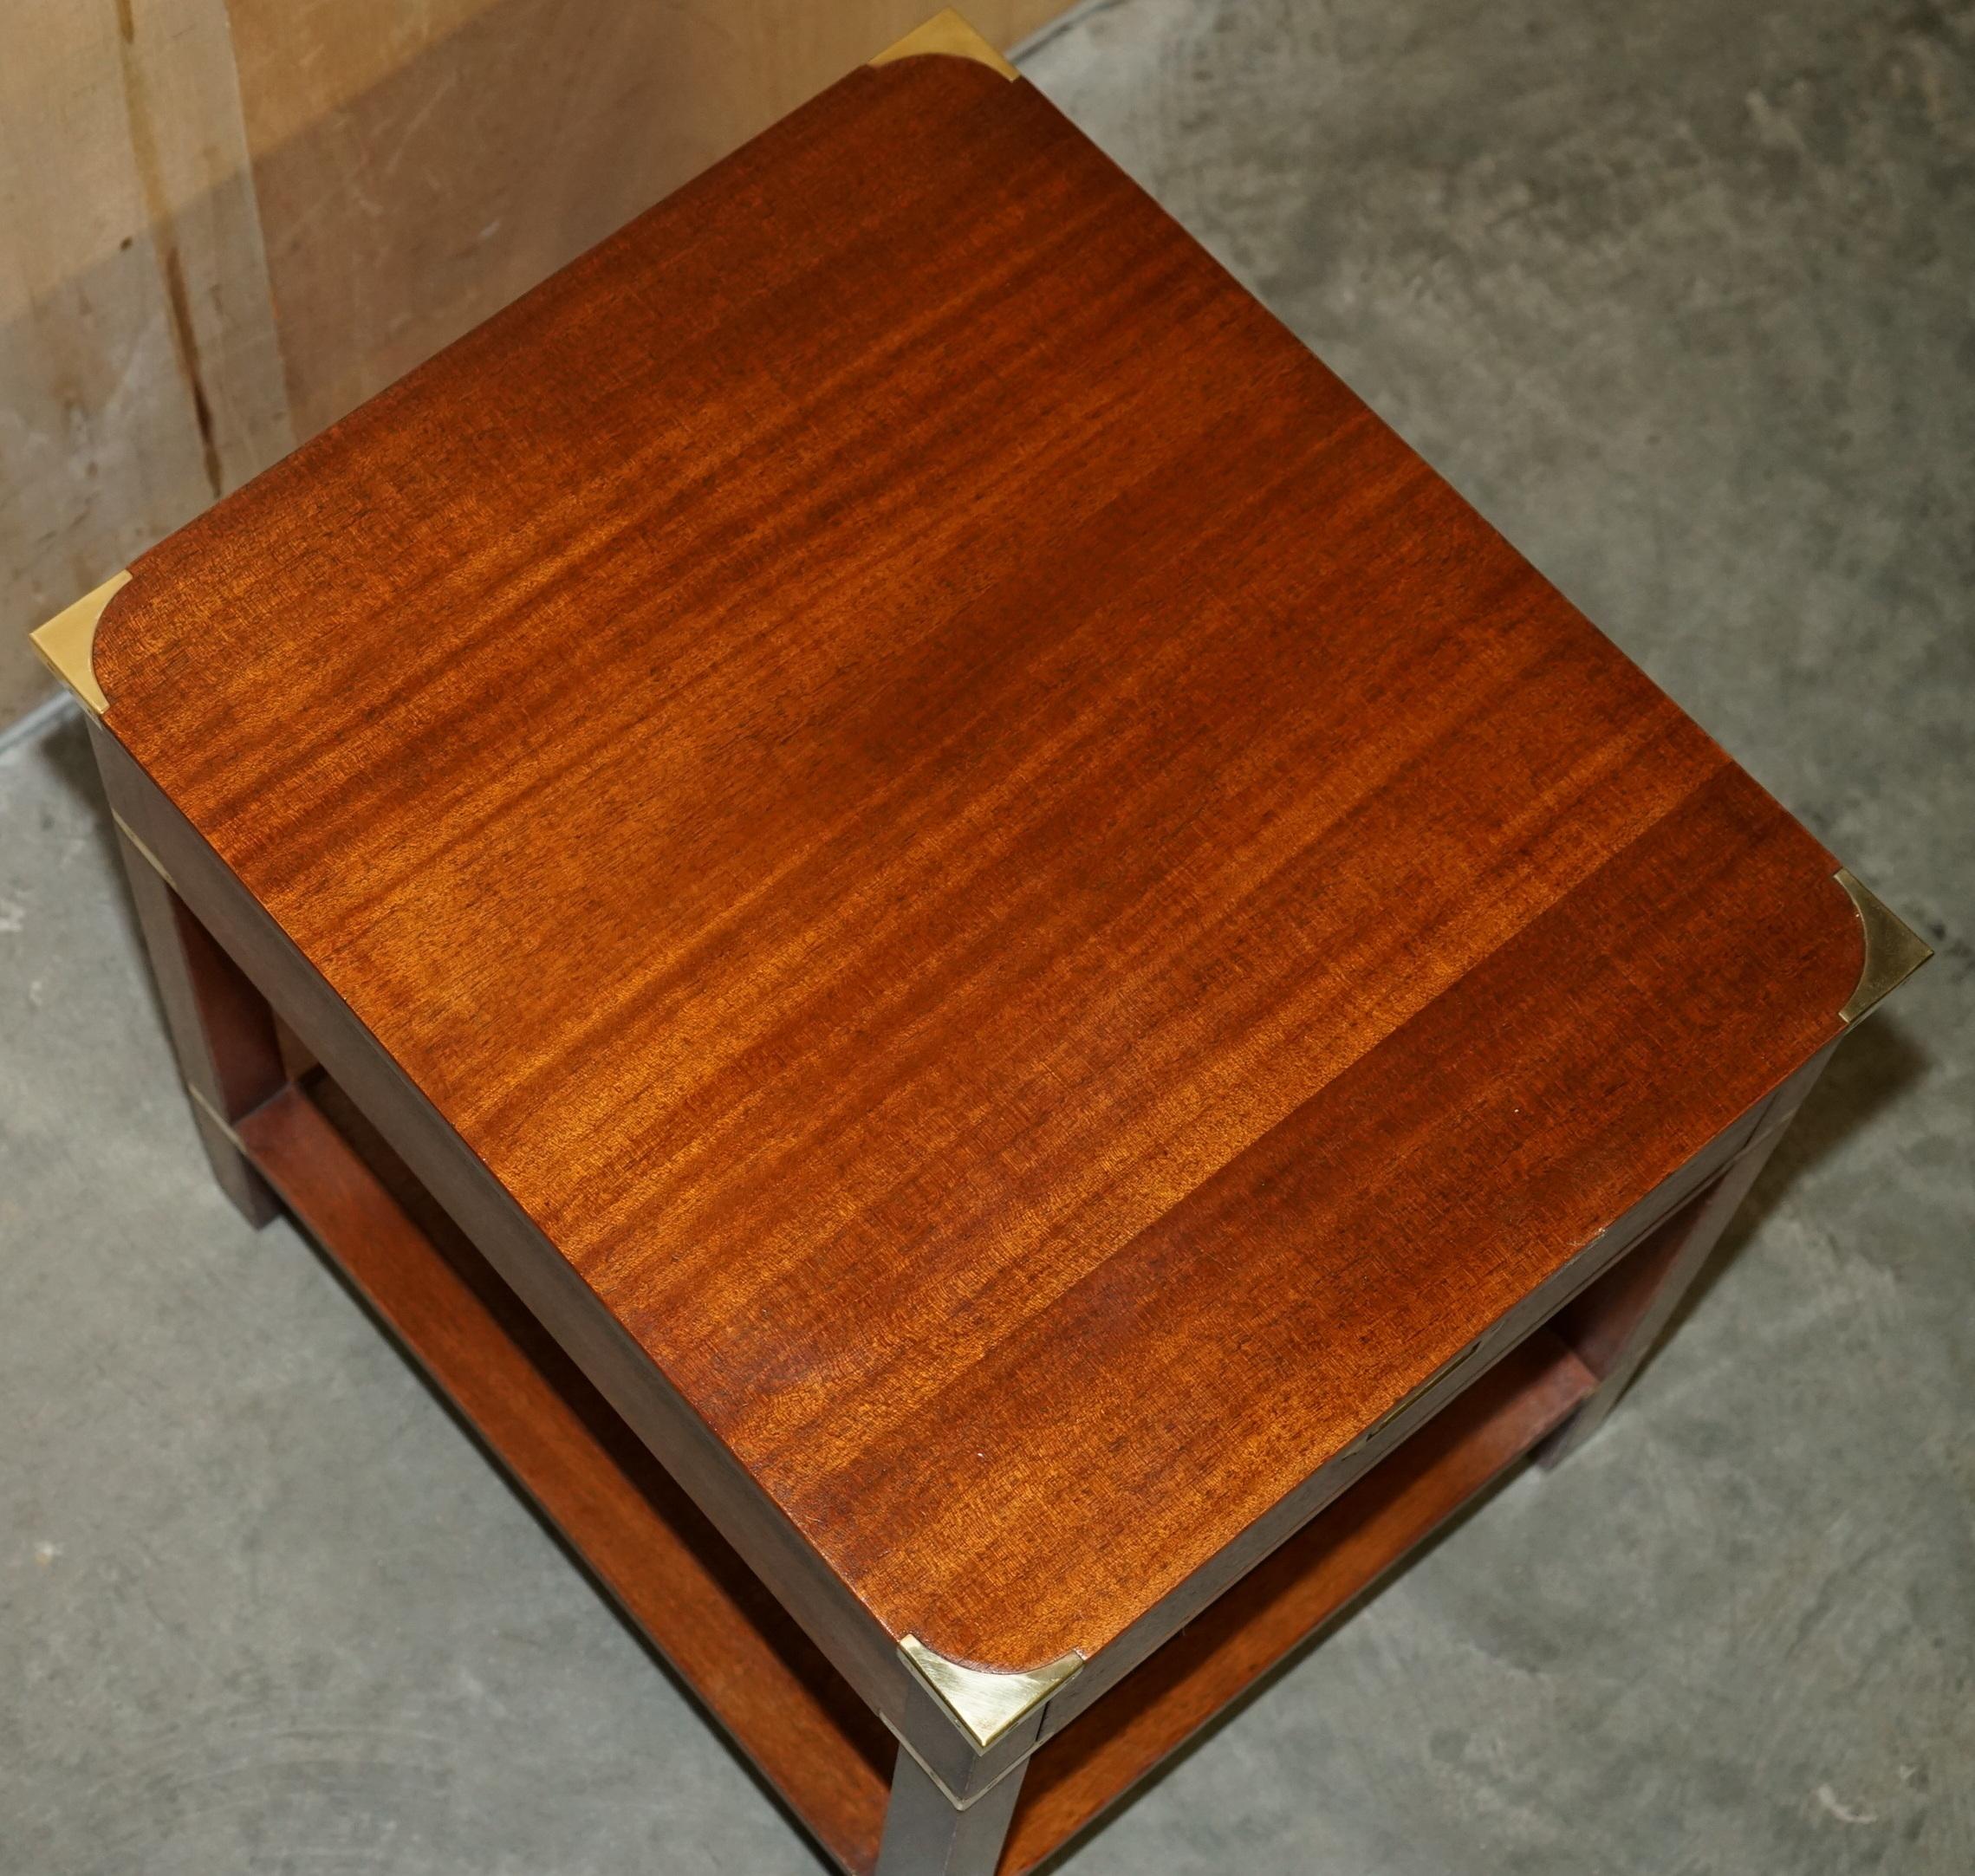 AIR OF FullY RESTORED HARRODS LONDON MiLITARY CAMPAIGN SINGLE DRAWER SIDE TABLE (Messing) im Angebot